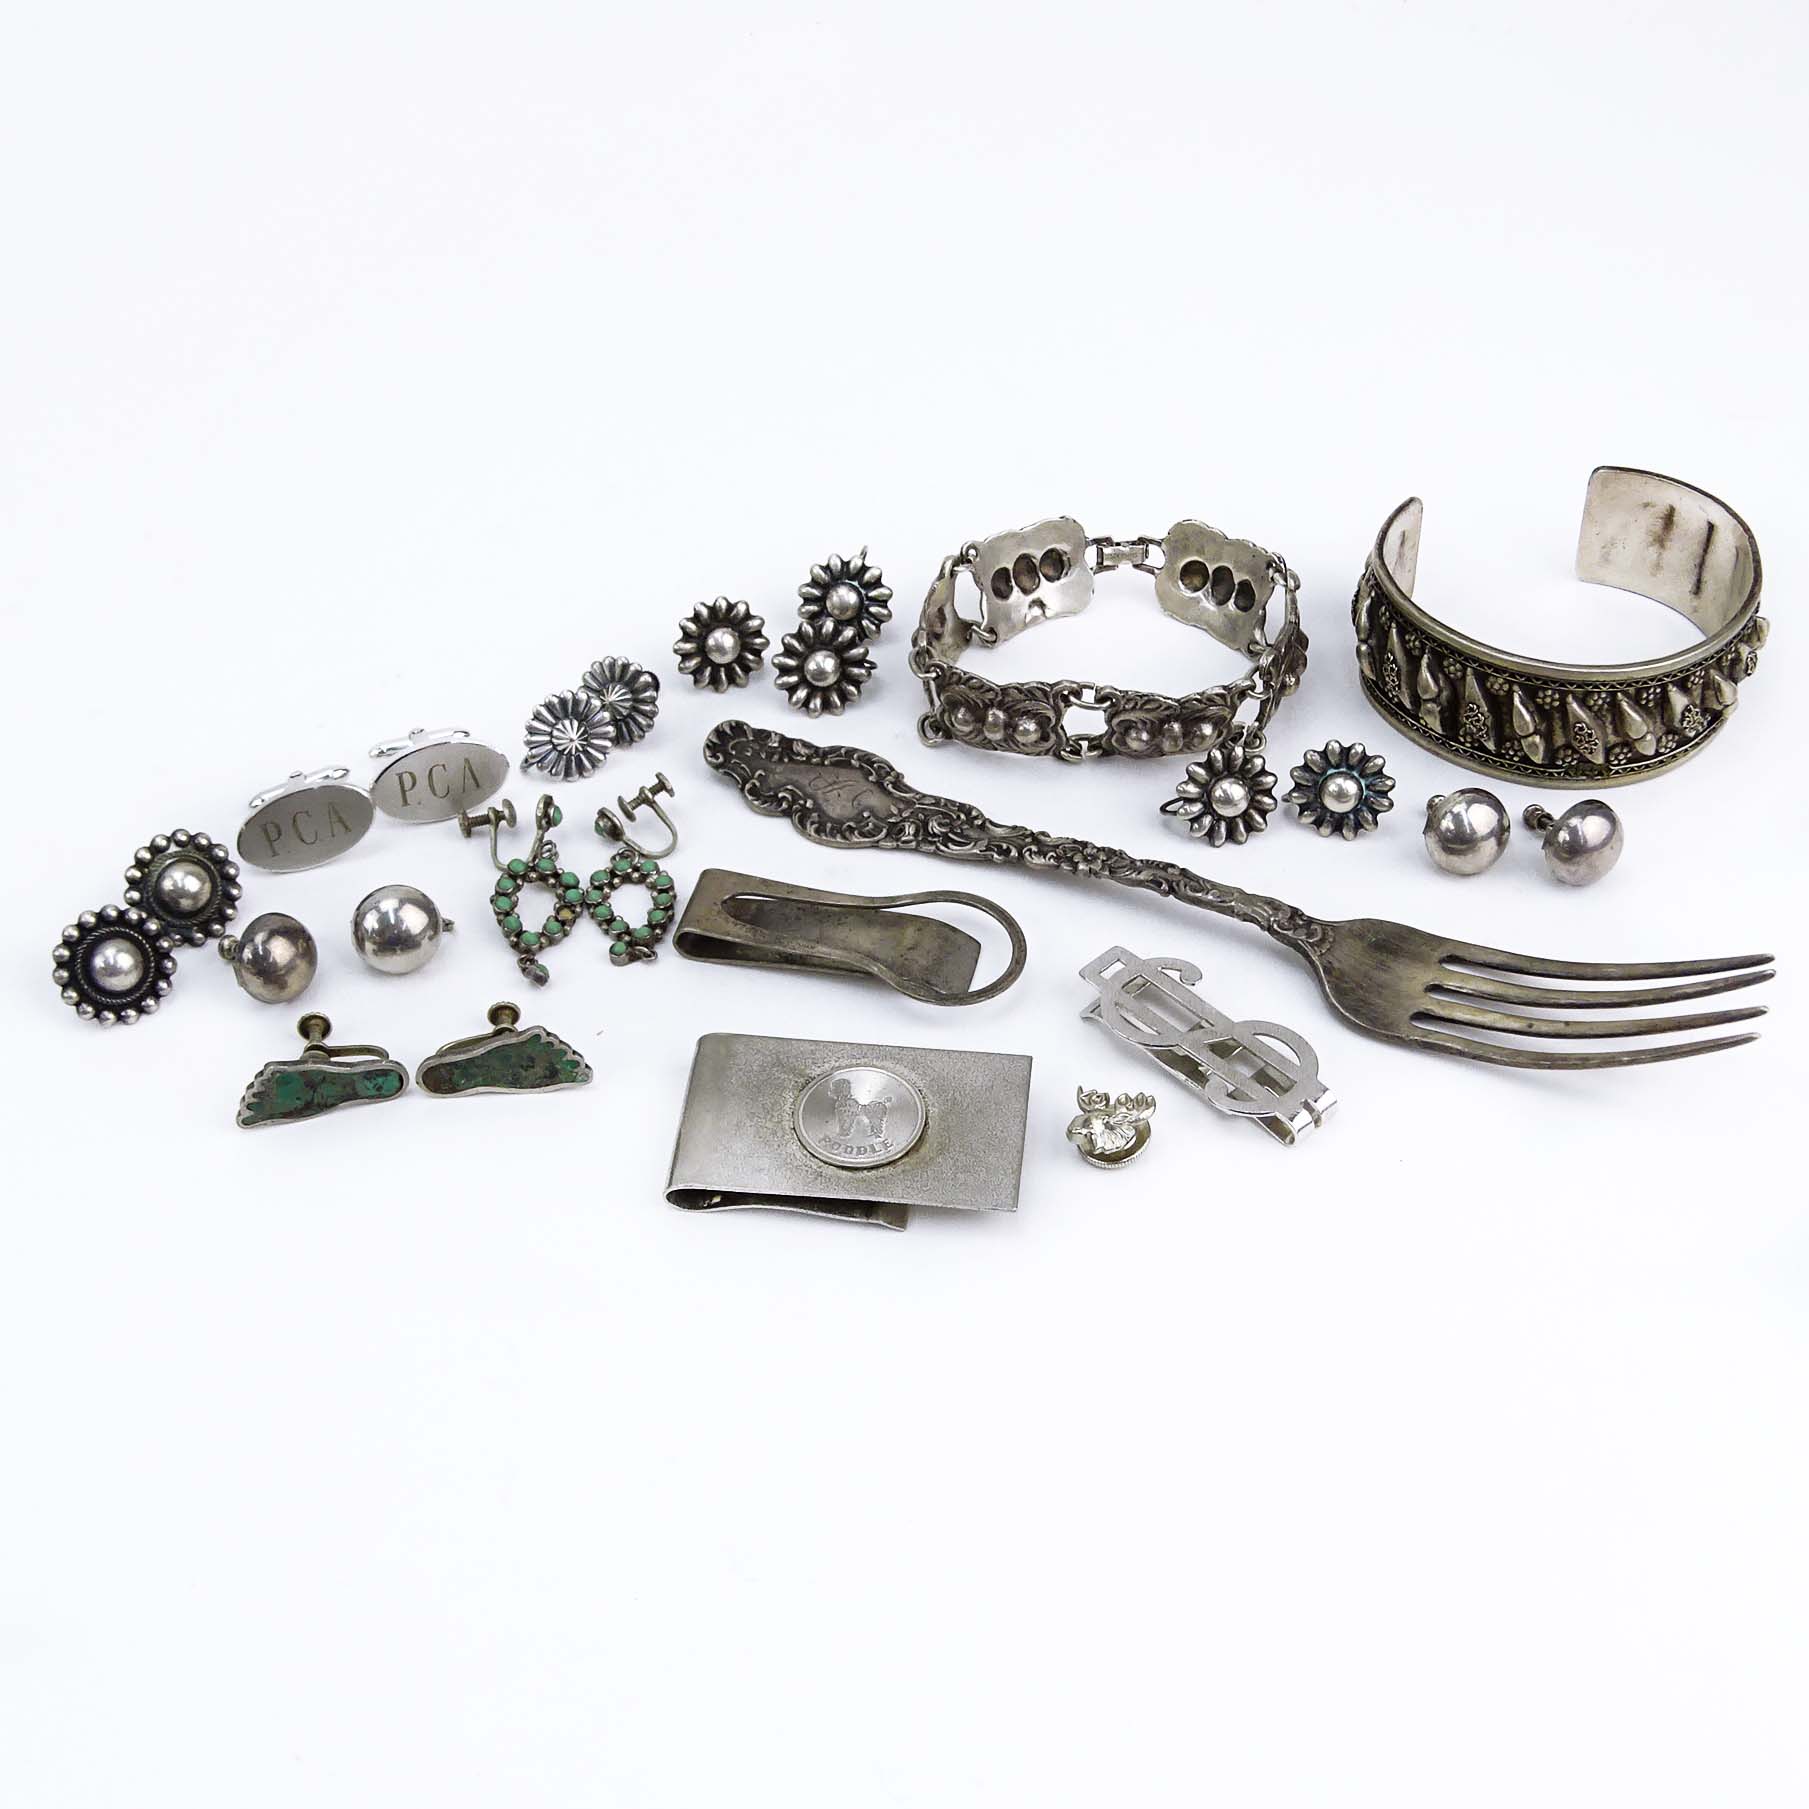 Collection of Sterling Silver Including: Three (3) Money Clips, One (1) Bracelet, Two (2) Pair of Earrings with Turquoise, One (1) Pair of Cufflinks, One (1) Tie Tack, Six pair of Button or Flower style Earrings plus One Earring and One (1) Low Grade Silv